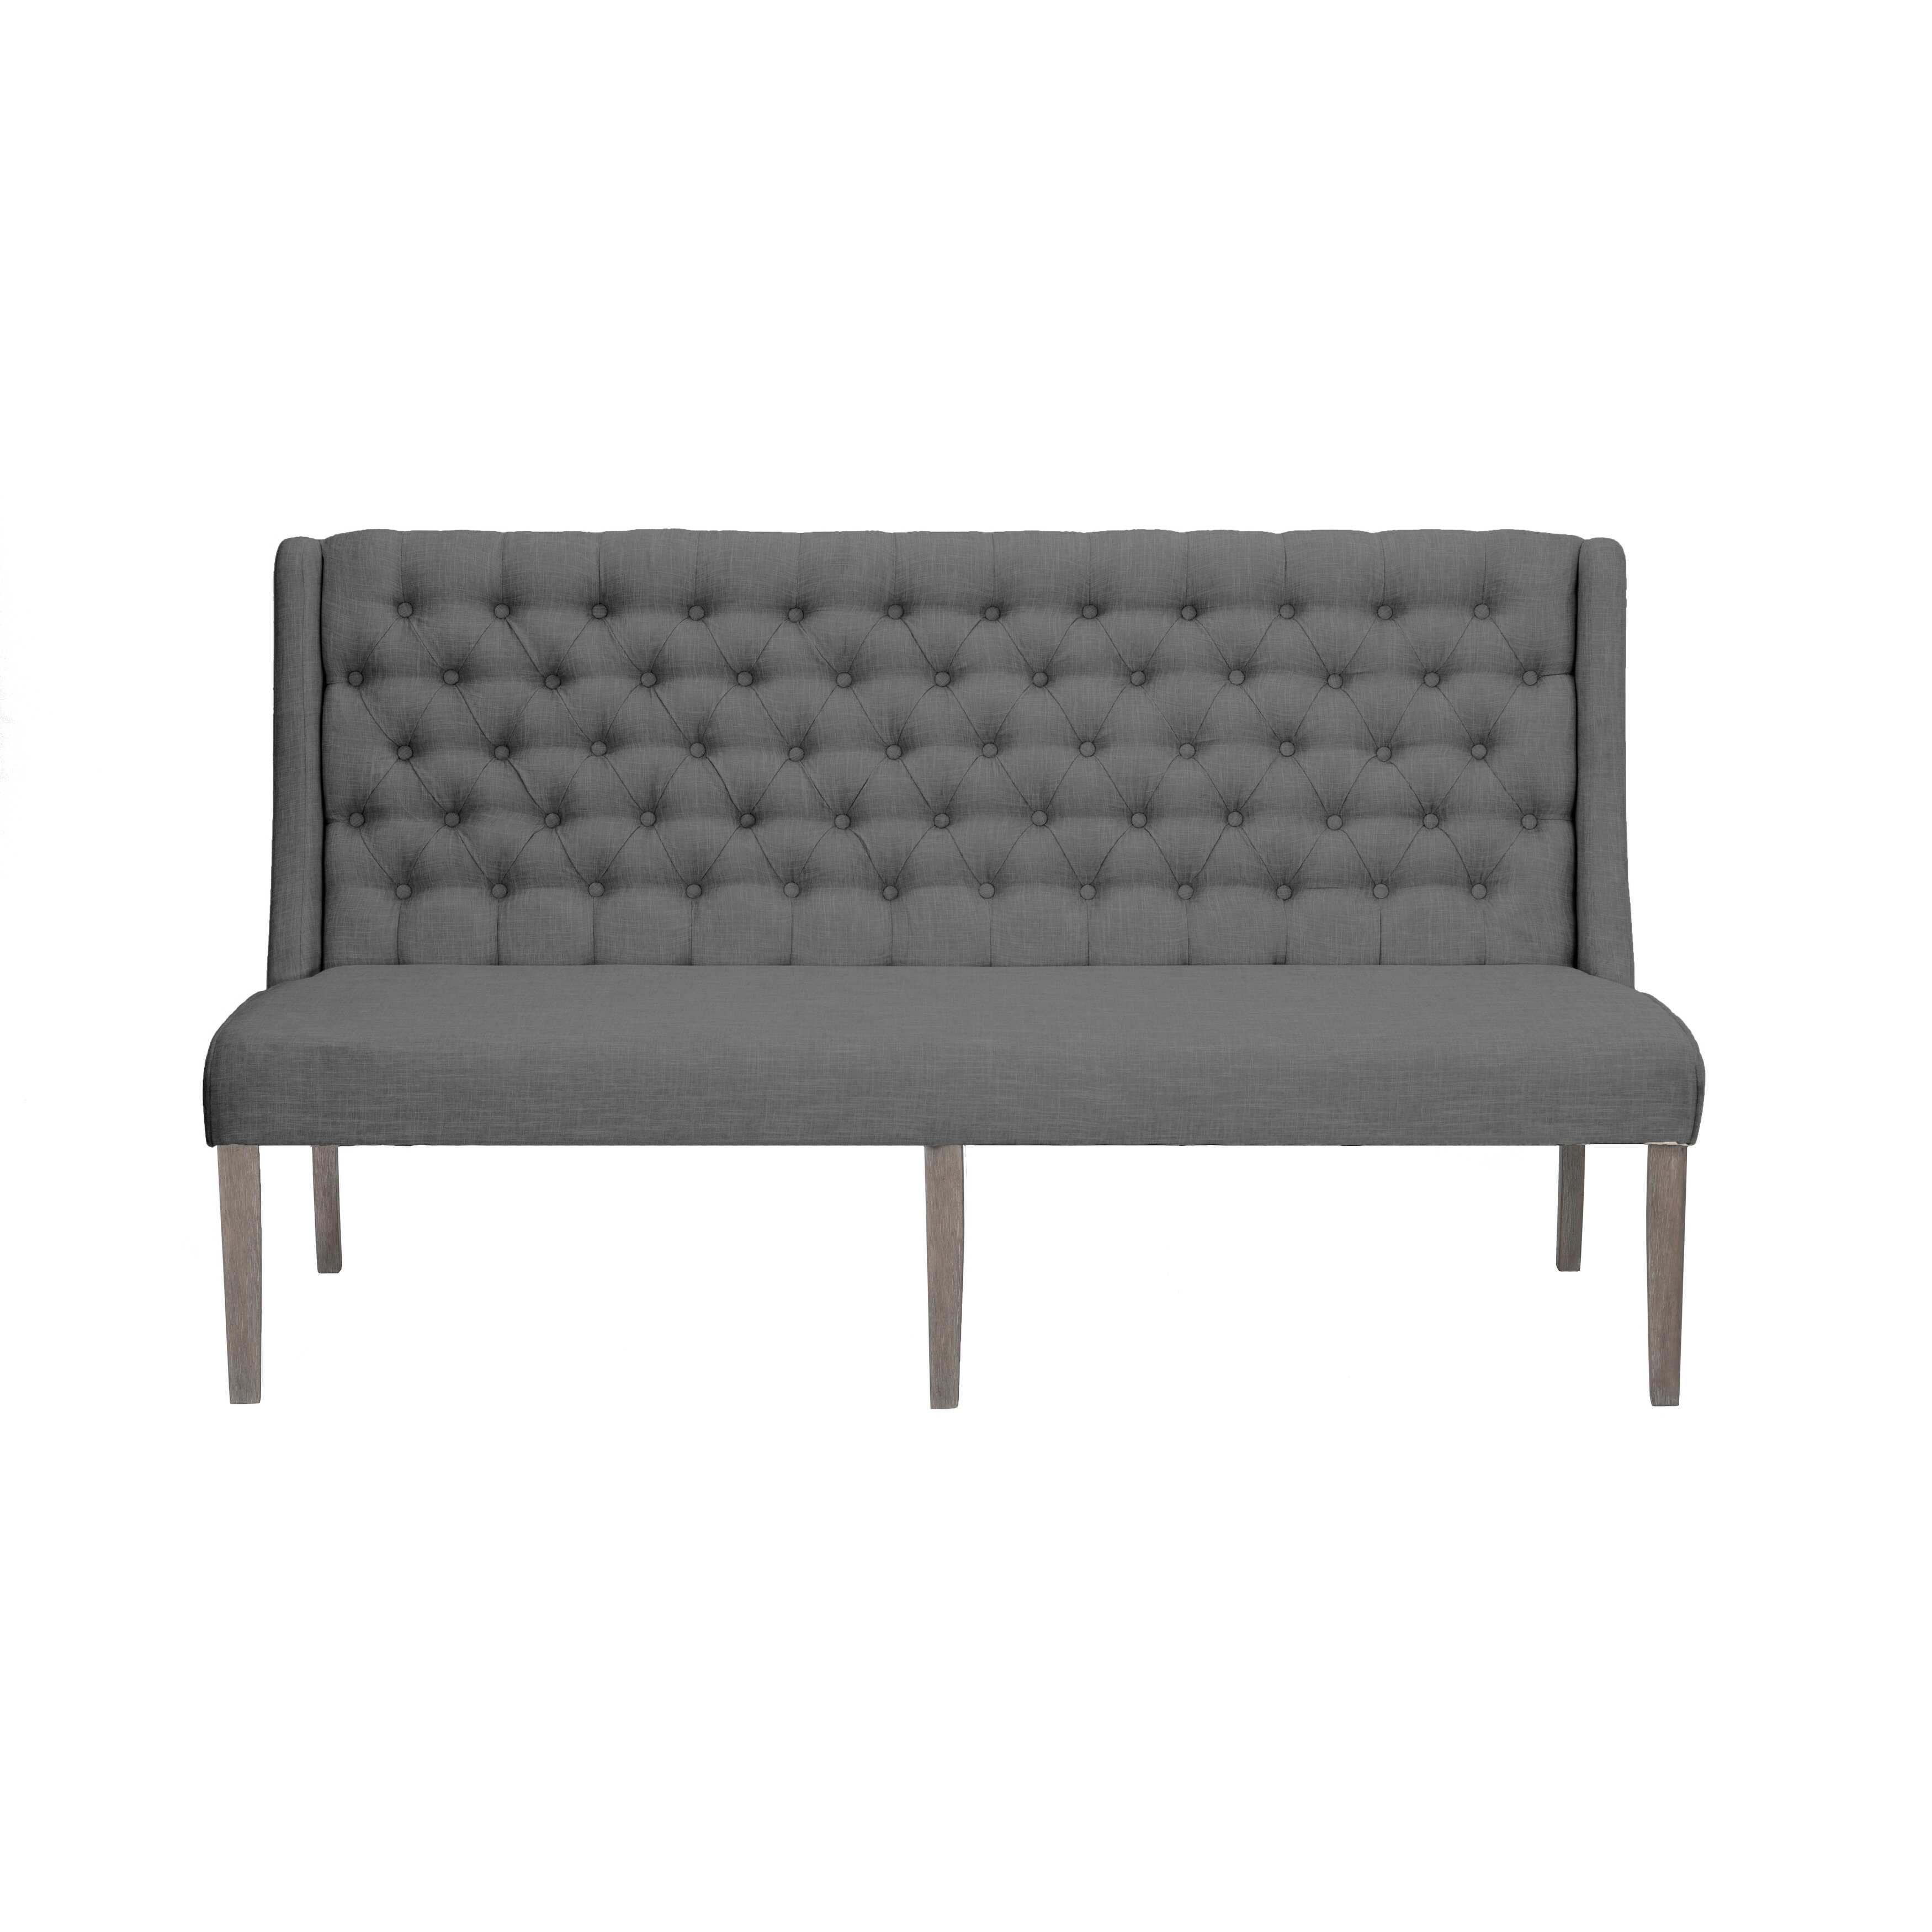 Best Quality Furniture Tufted Upholstered Bench